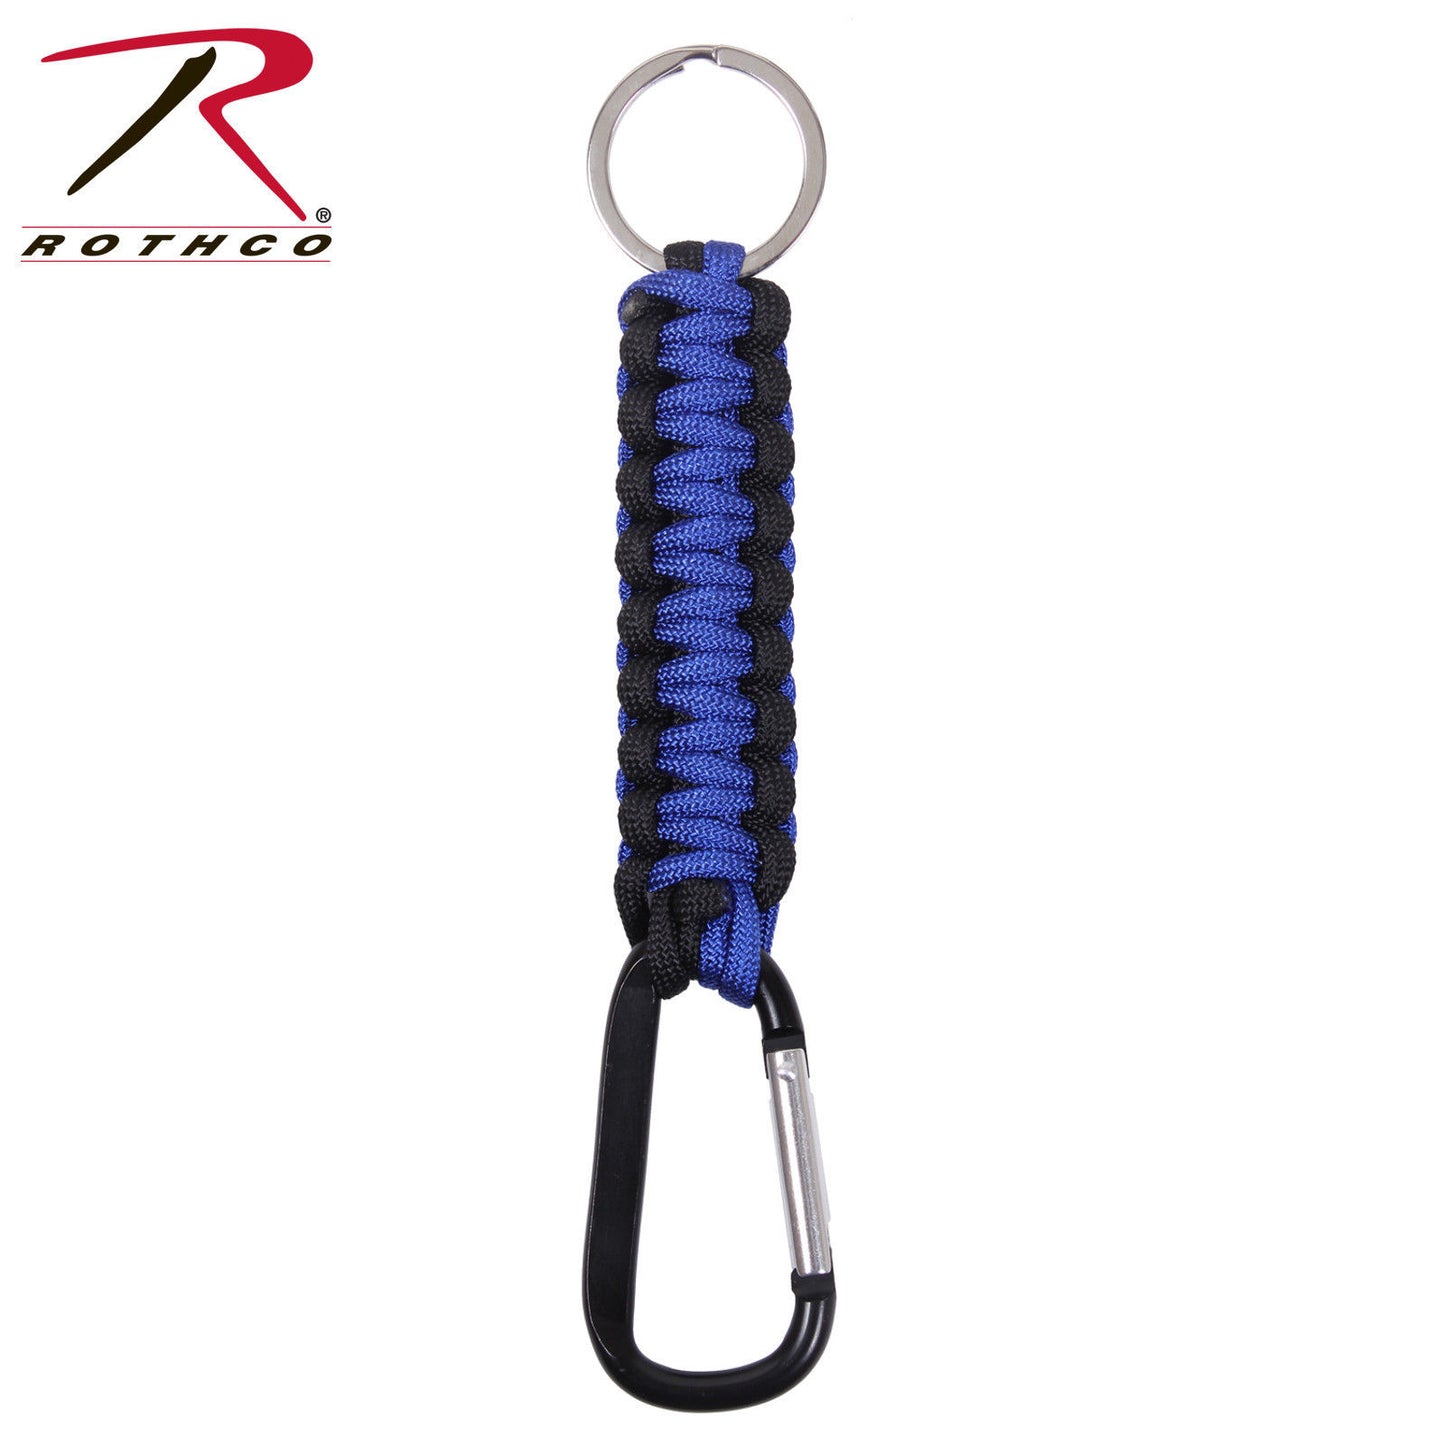 Rothco Thin Blue Line Paracord Keychain With 60 MM Black Carabiner